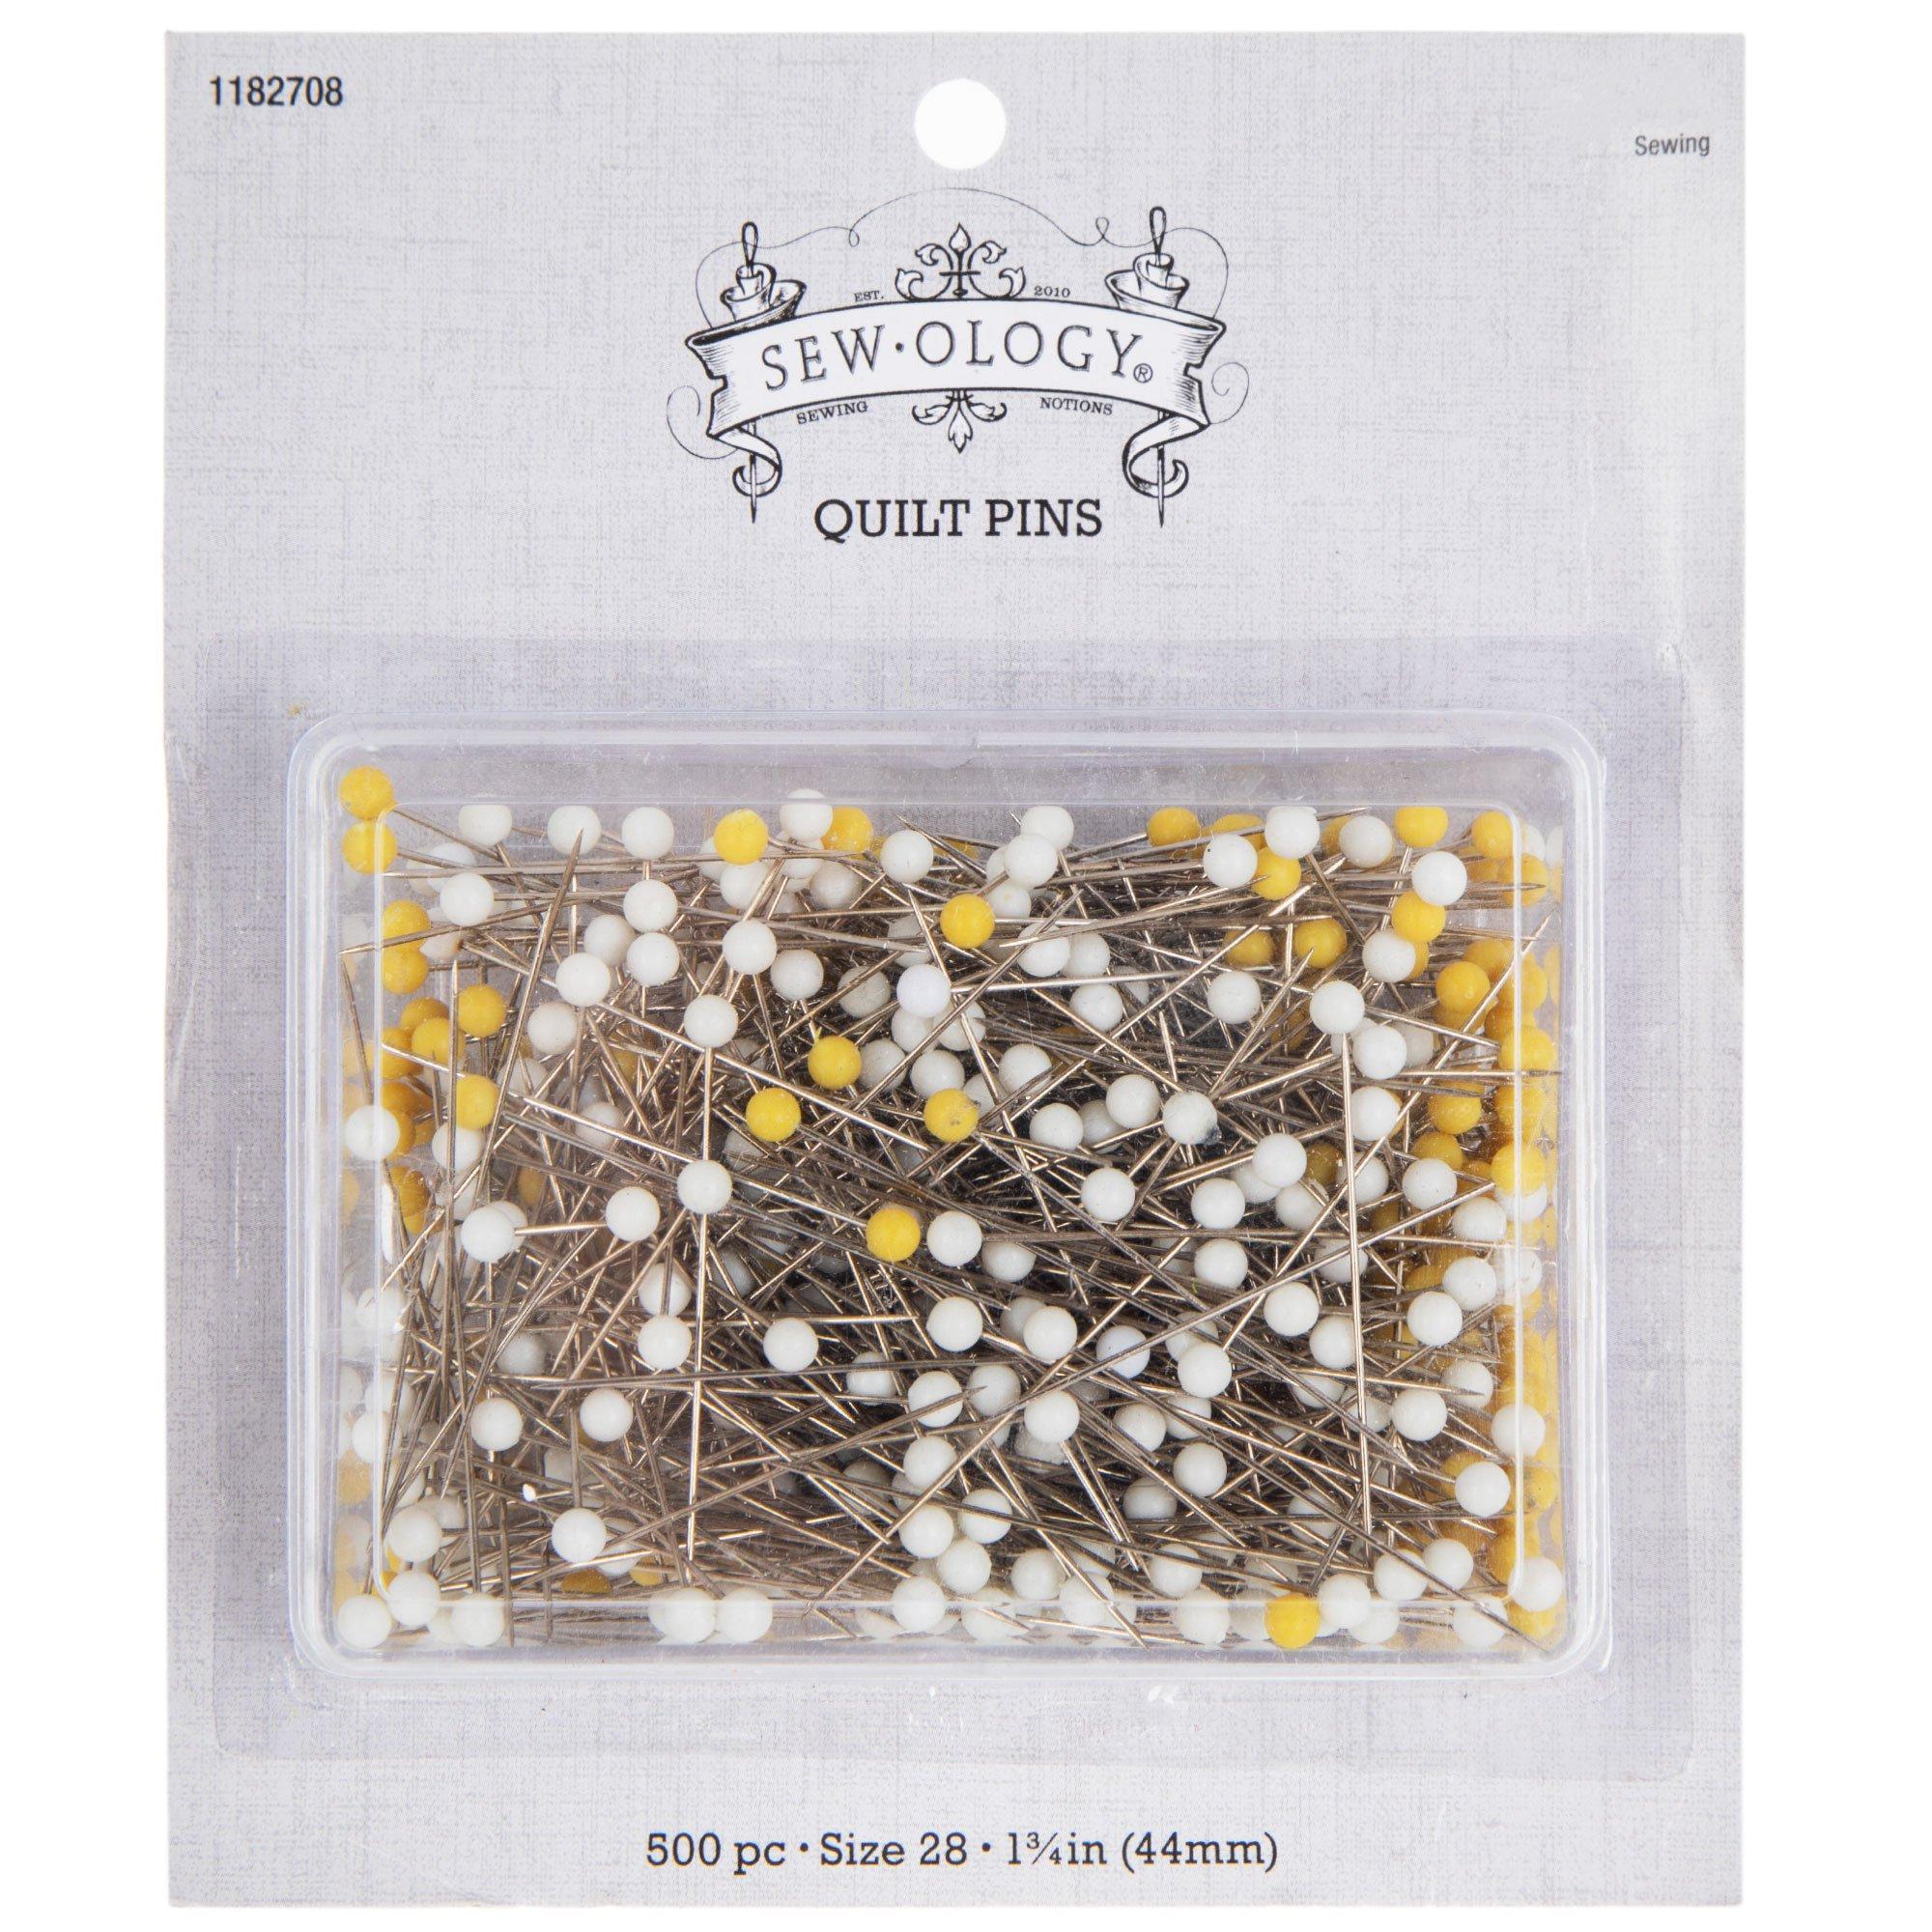 Singer, Size 28 Quilting Pins in Flower Case - 200pk : Sewing Parts Online